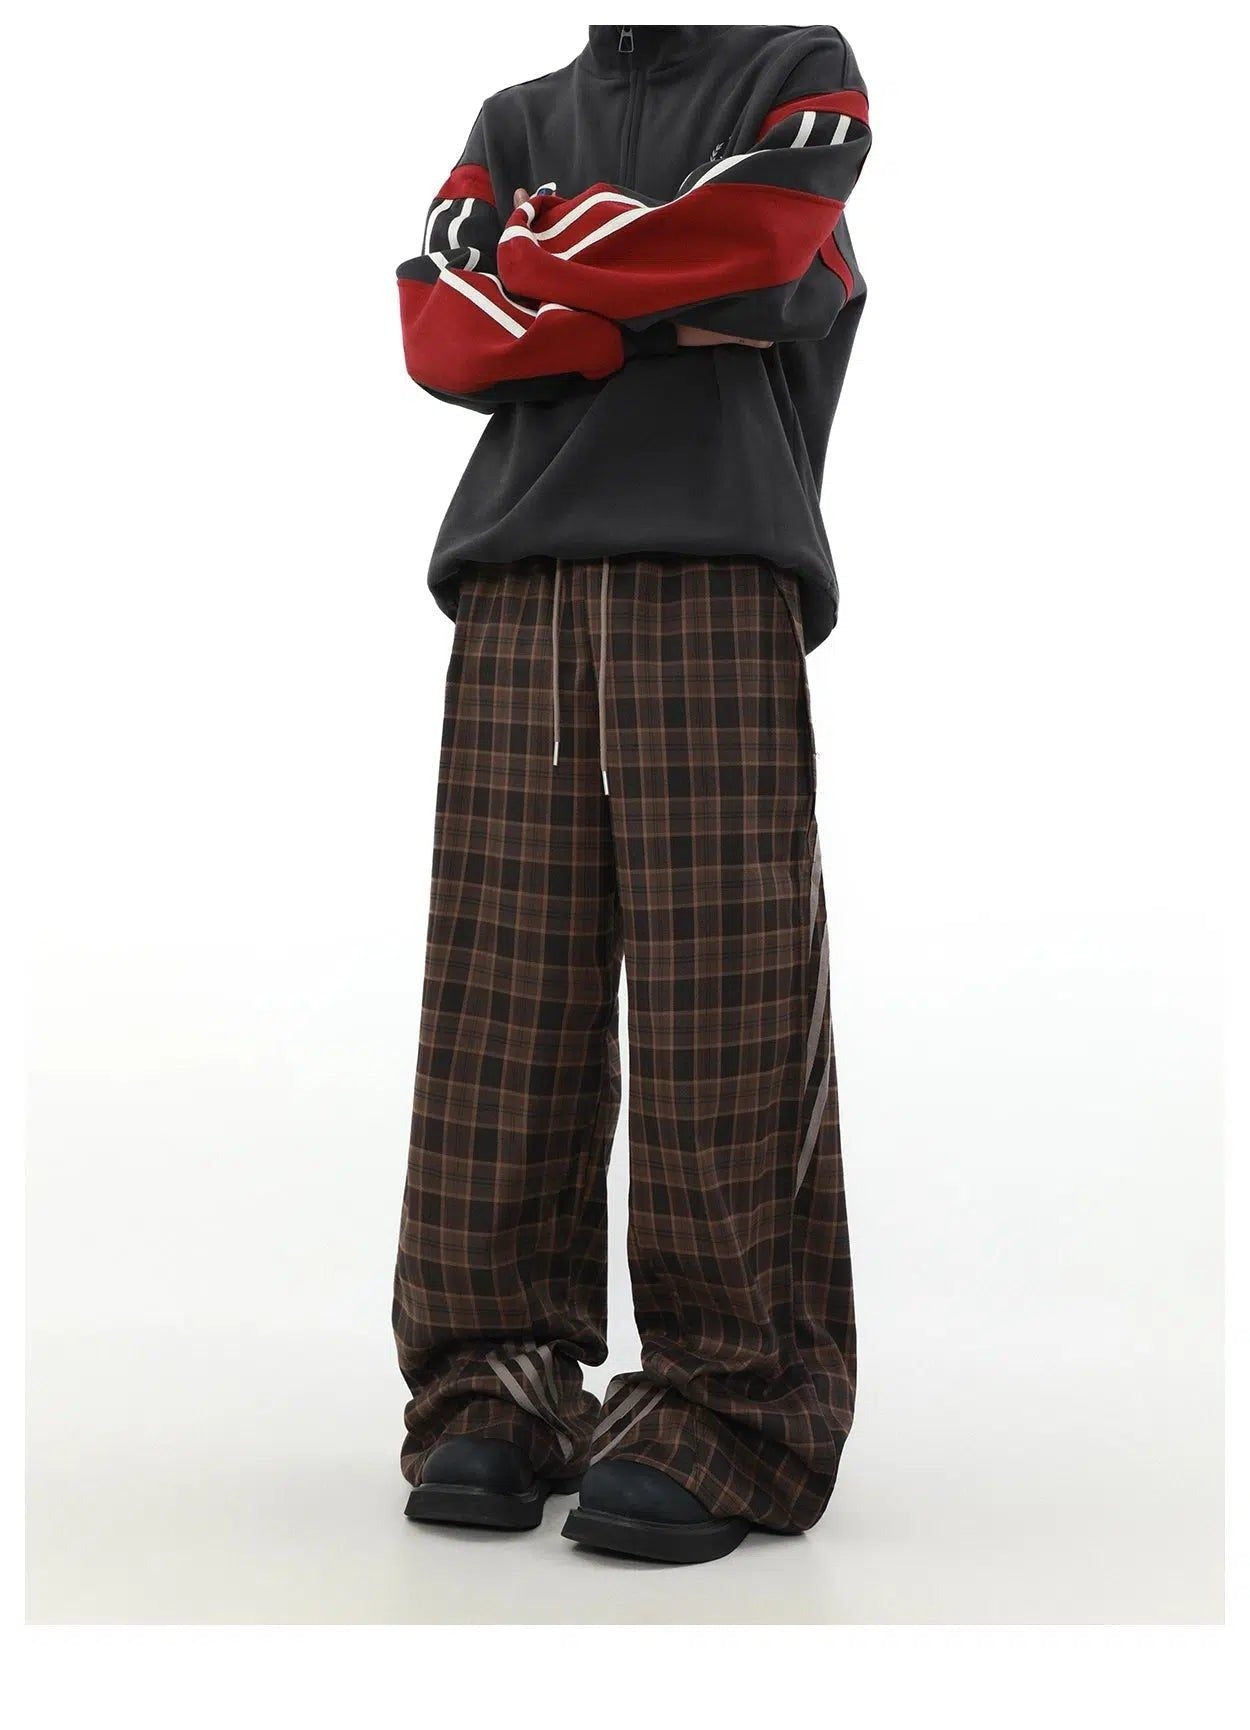 Casual Striped Plaid Pants Korean Street Fashion Pants By Mr Nearly Shop Online at OH Vault